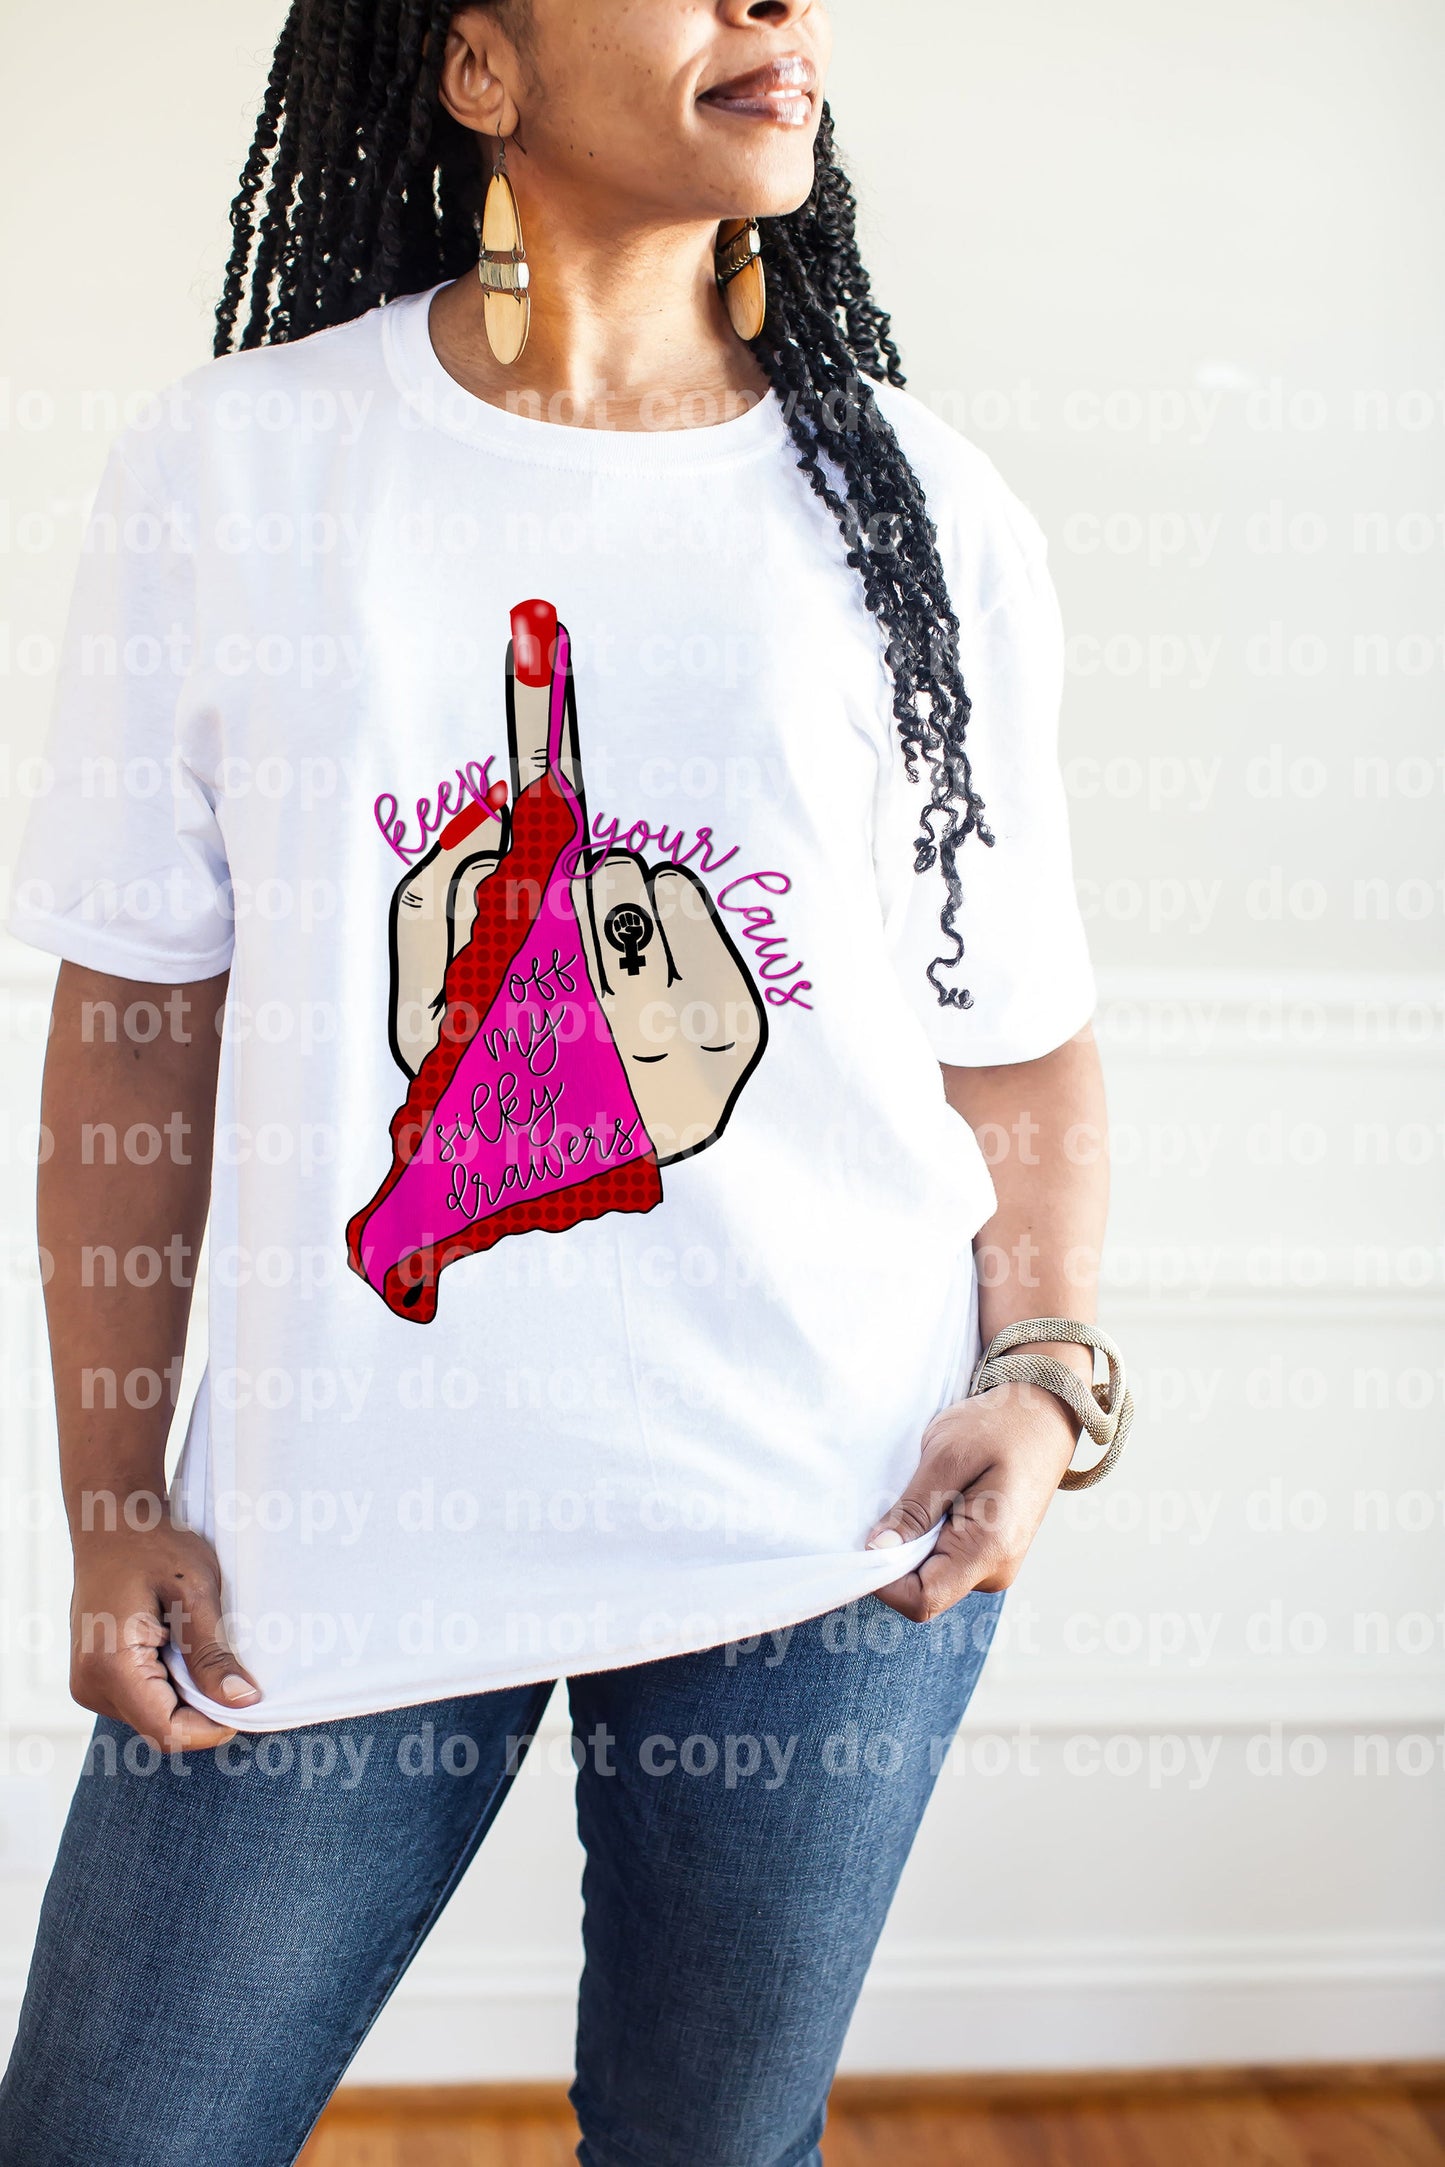 Keep Your Laws Off My Silky Drawers Dream Print or Sublimation Print